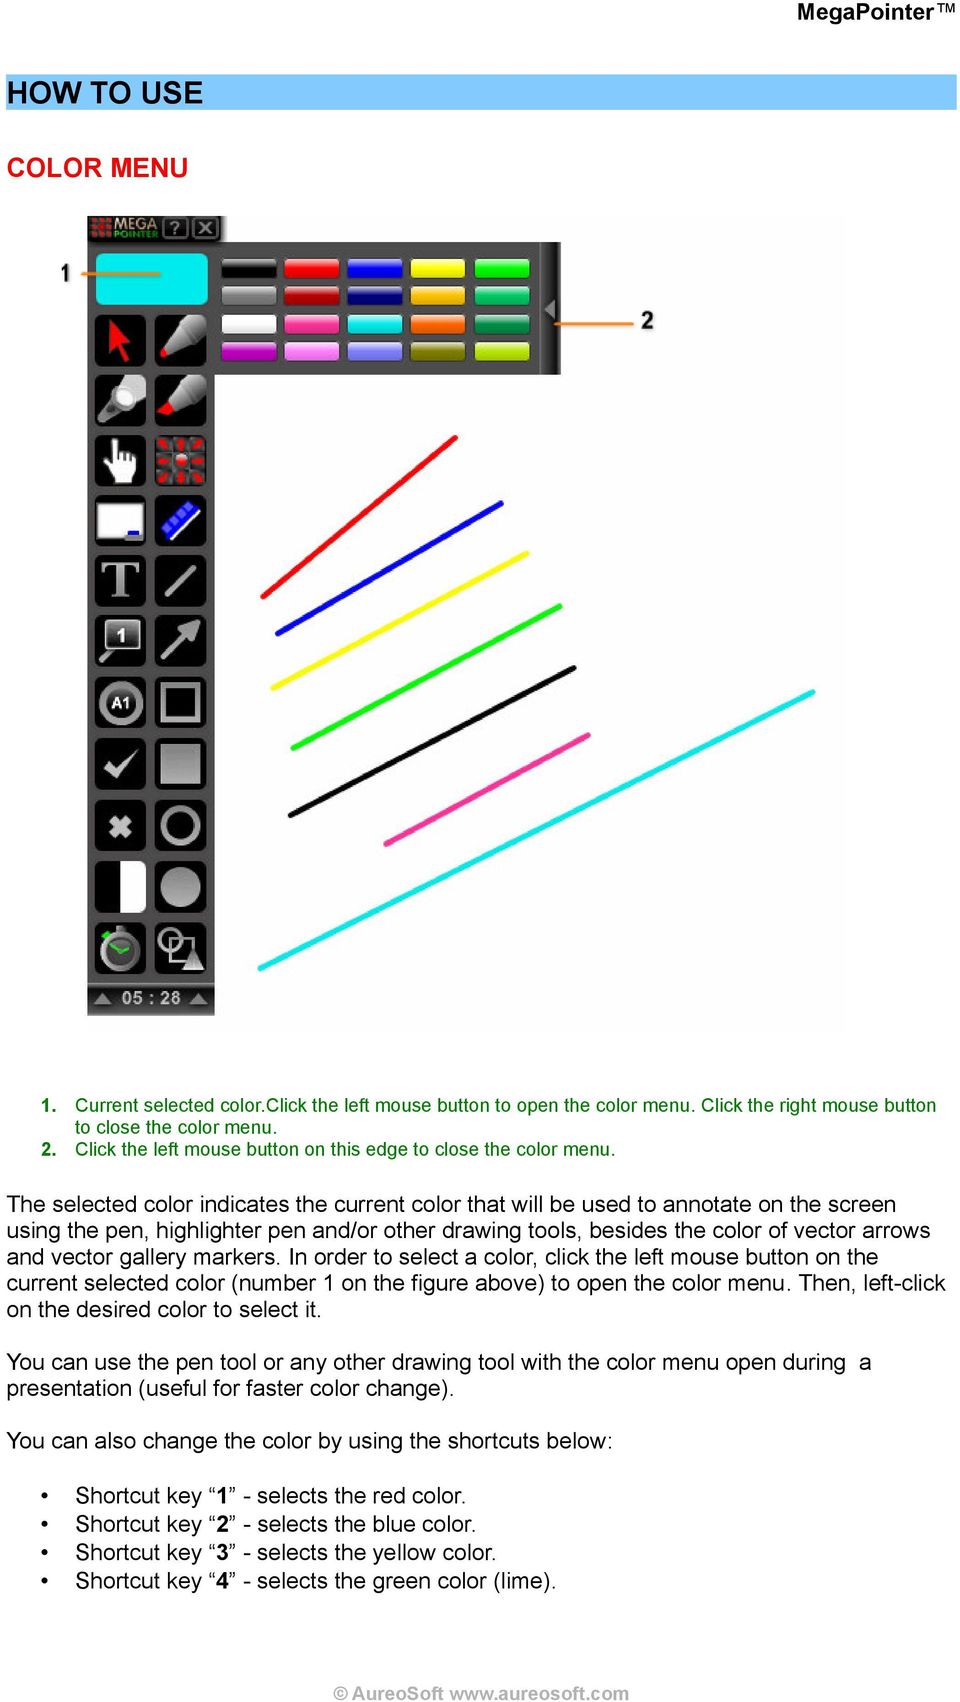 The selected color indicates the current color that will be used to annotate on the screen using the pen, highlighter pen and/or other drawing tools, besides the color of vector arrows and vector